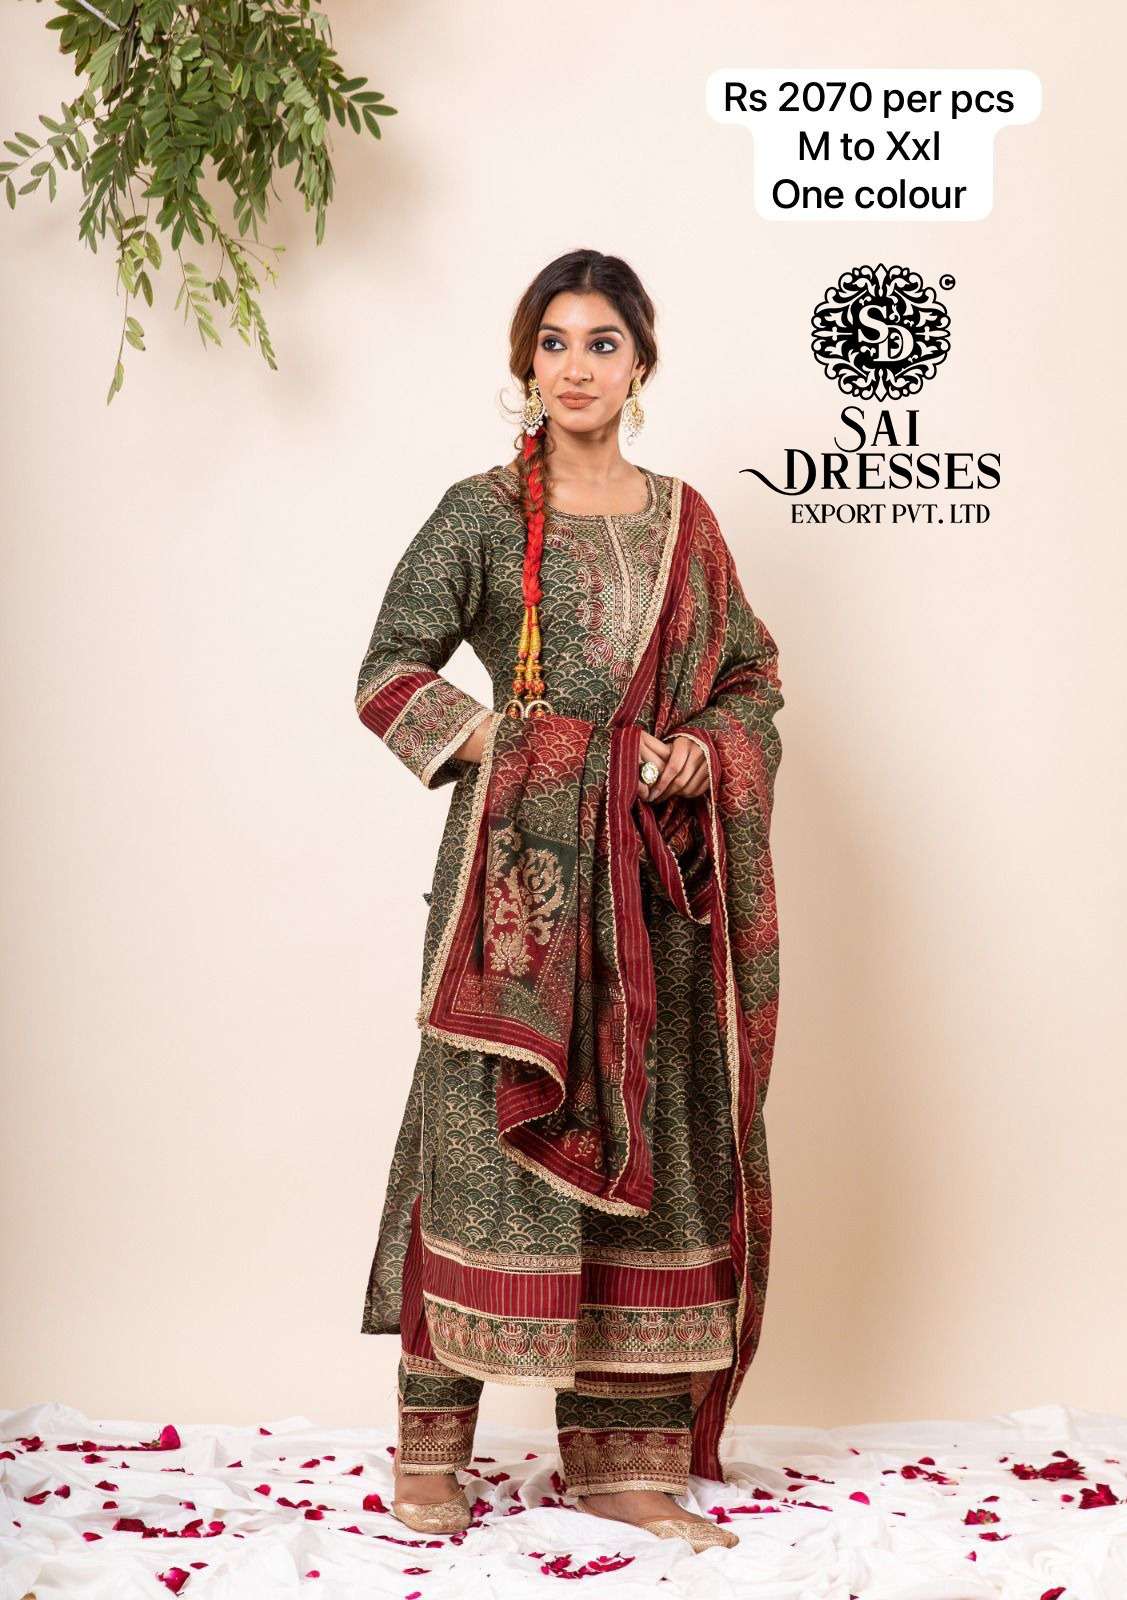 SAI DRESSES PRESENT READY TO ETHNIC WEAR NAIRA CUT PANT STYLE DESIGNER 3 PIECE COMBO SUITS IN WHOLESALE RATE IN SURAT